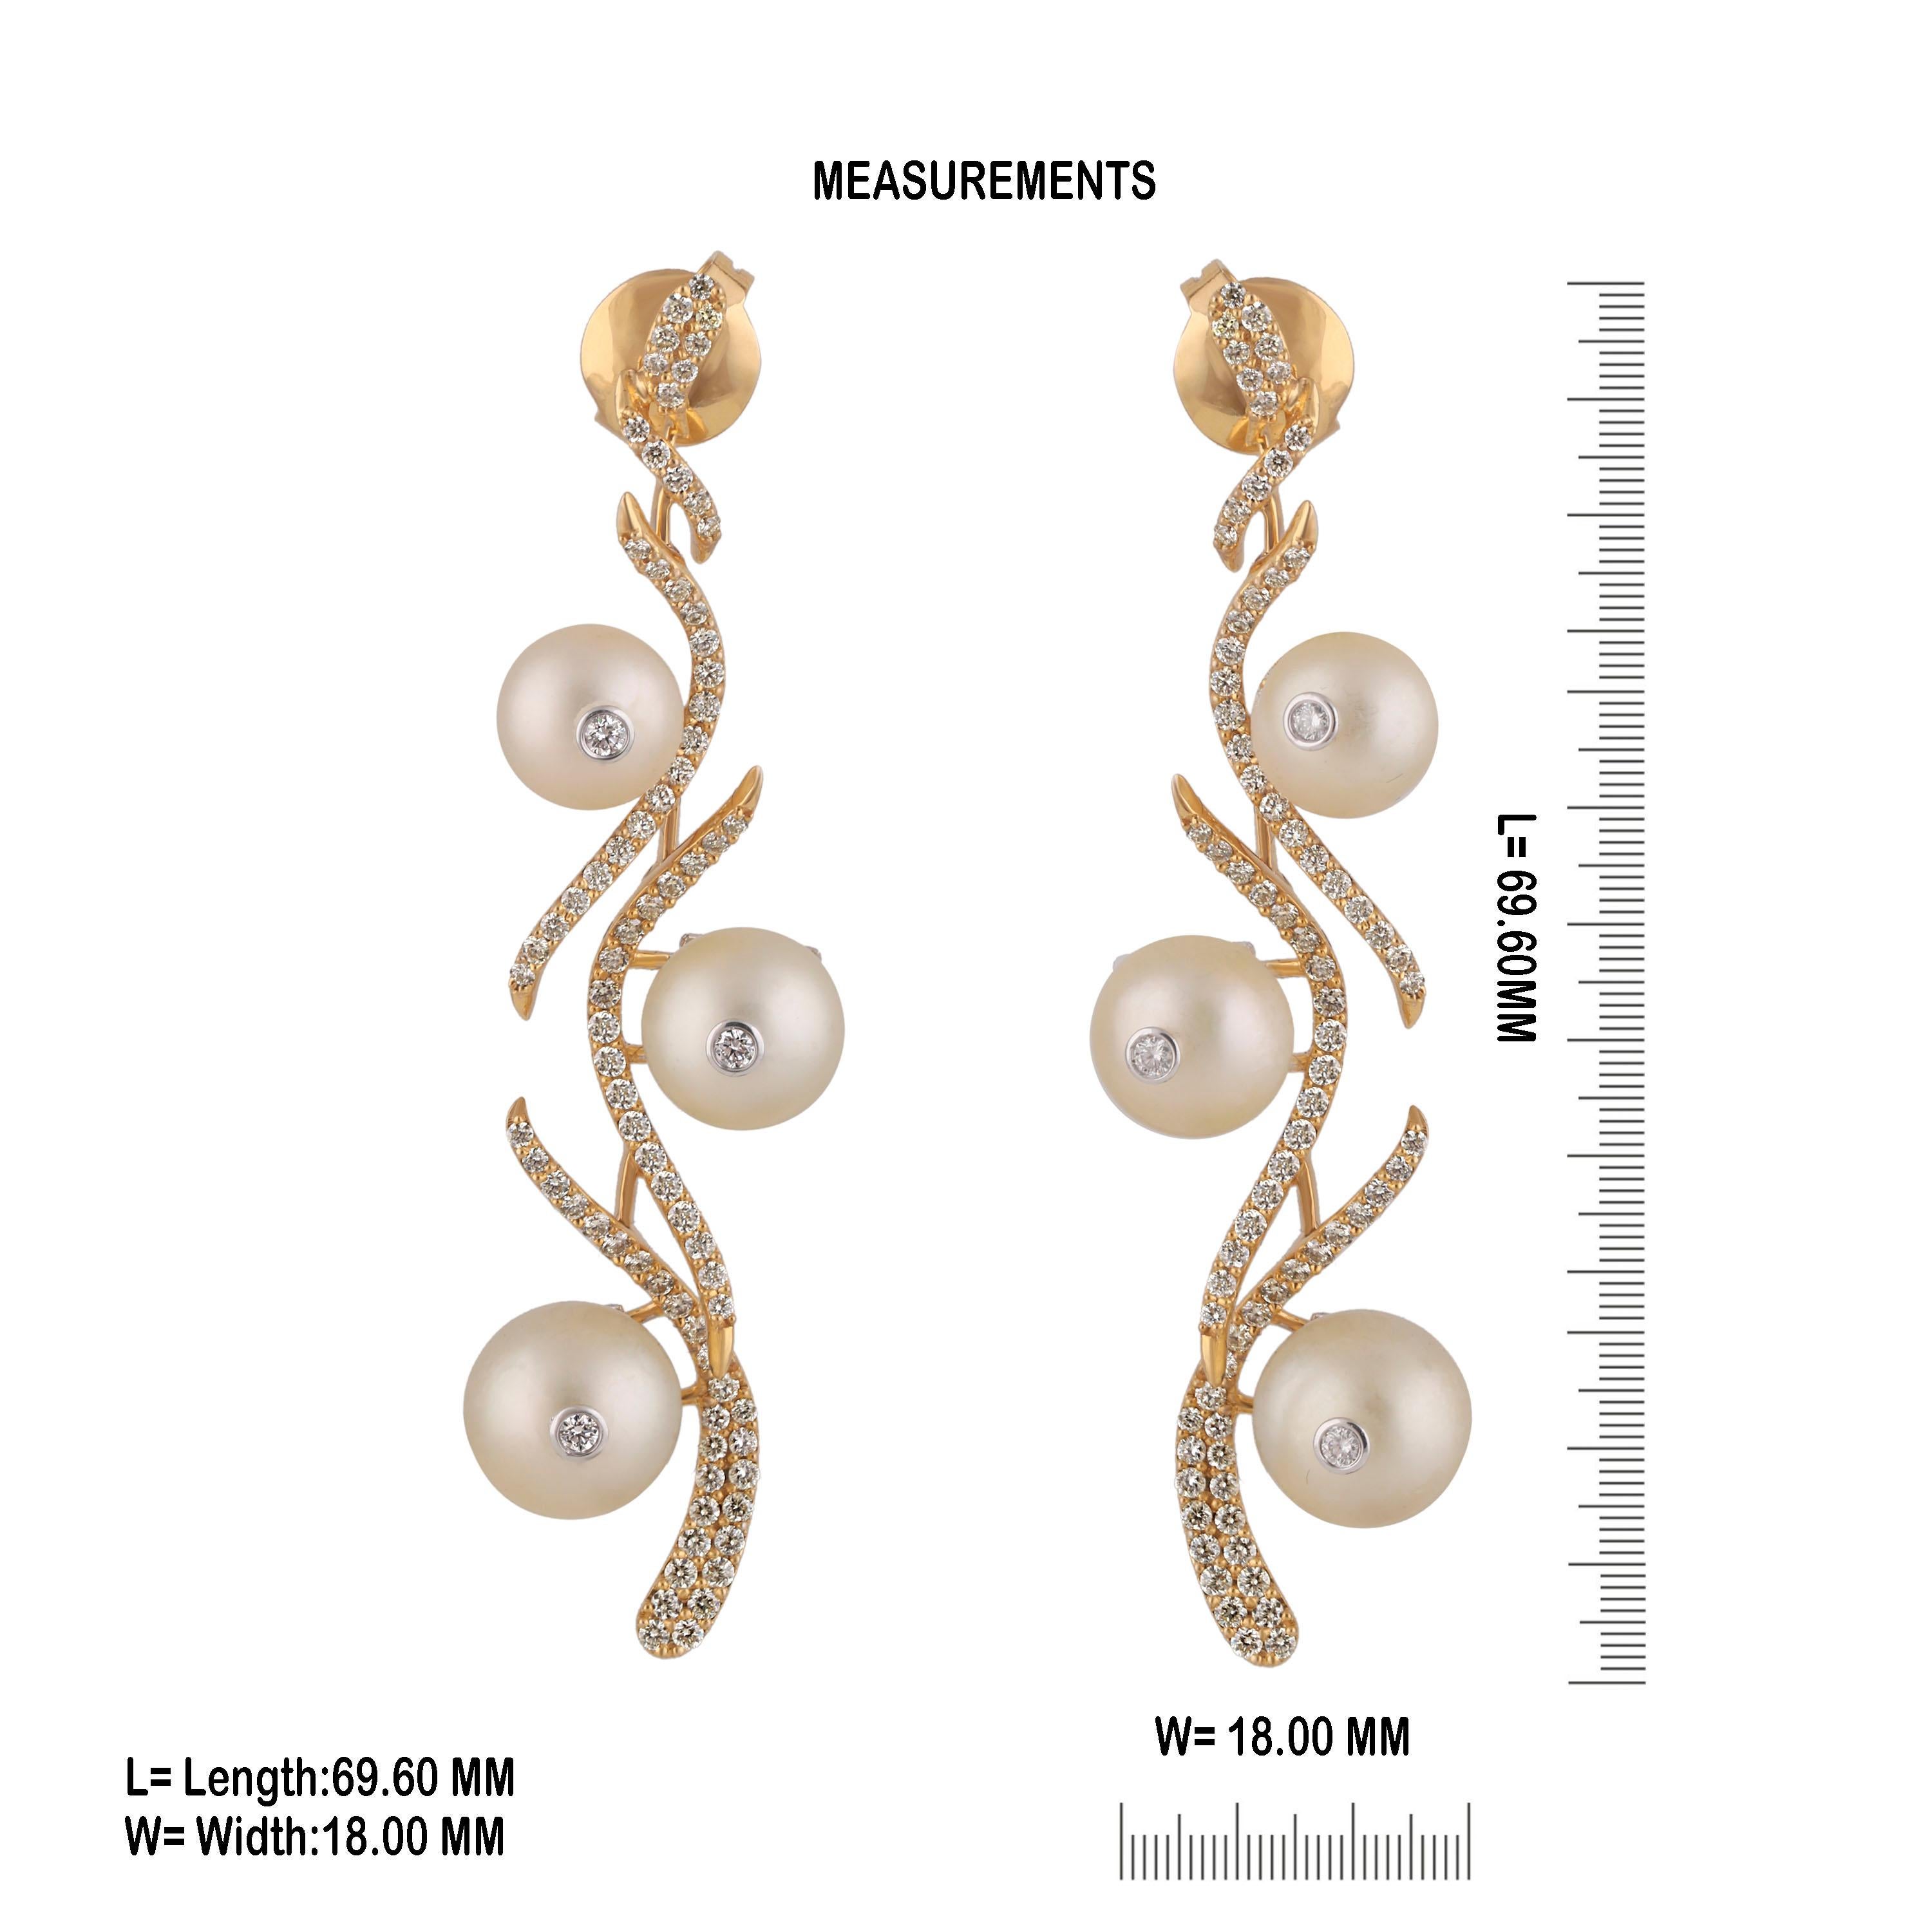 Studio RêvesC Floral Themed Diamond and Pearl Dangling Earrings in 18K Gold In New Condition For Sale In Mumbai, Maharashtra